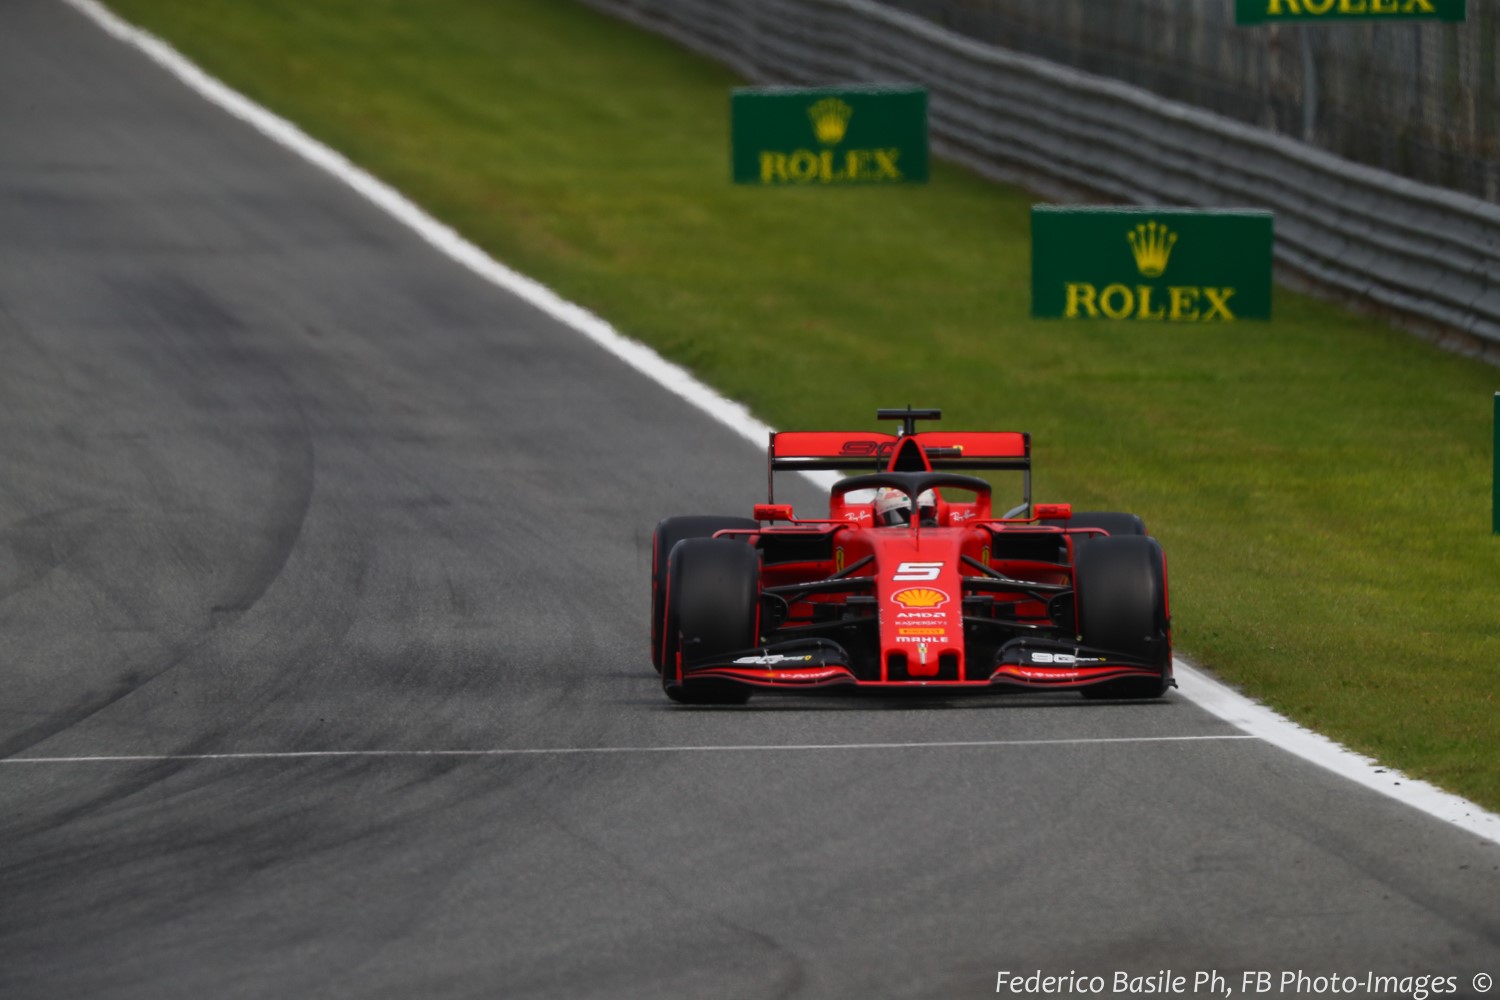 For the 2nd year in a row Vettel drove like a wanker at Monza